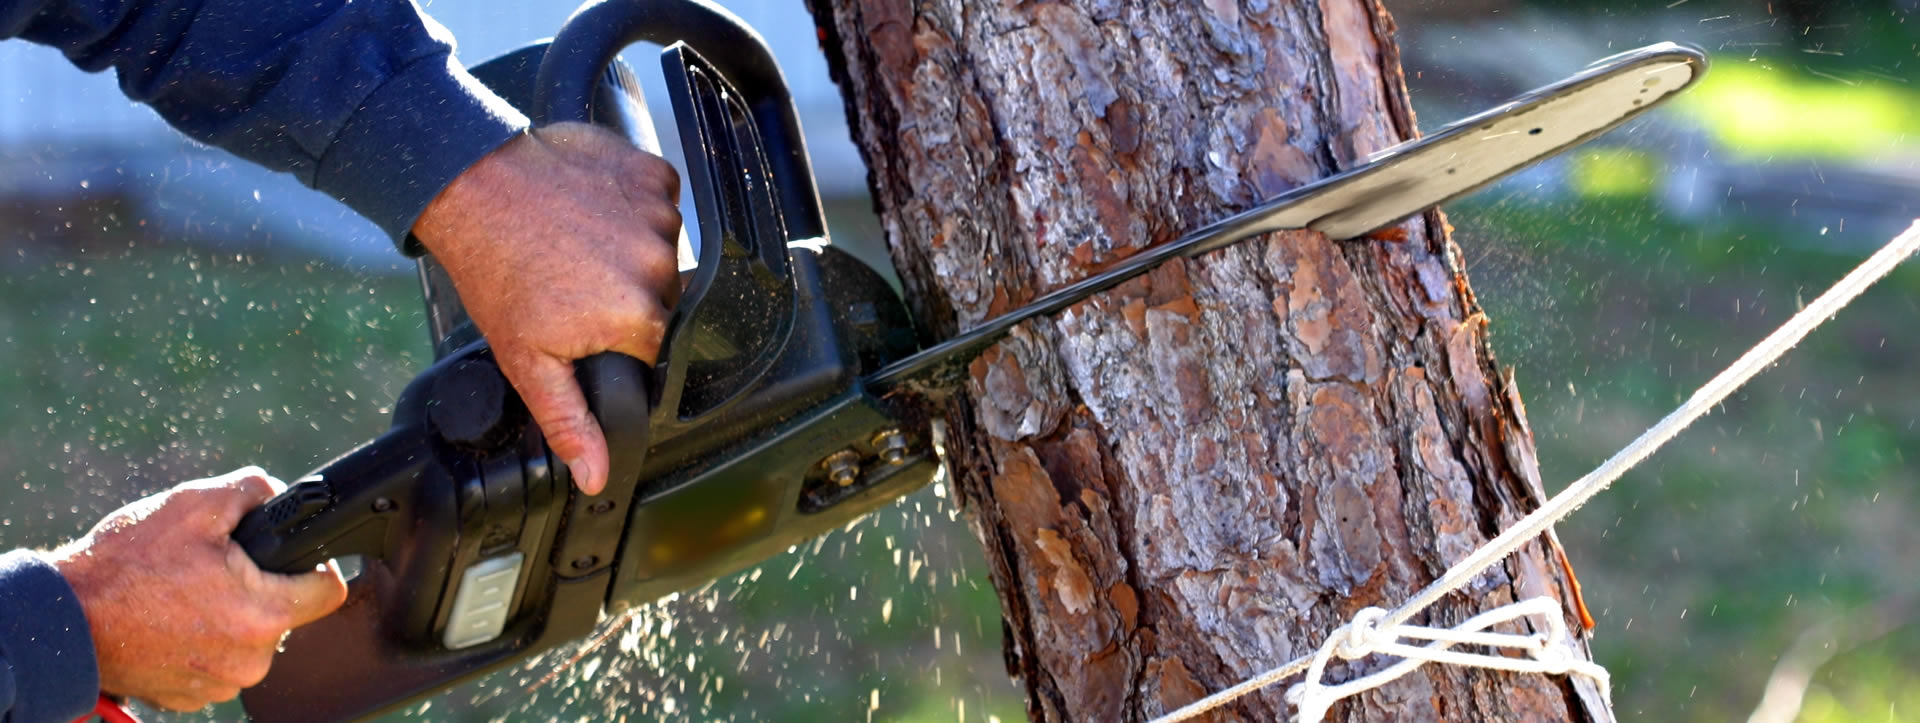 Licensed Tree Removal Contractor - Big Timber Tree Service, LLC